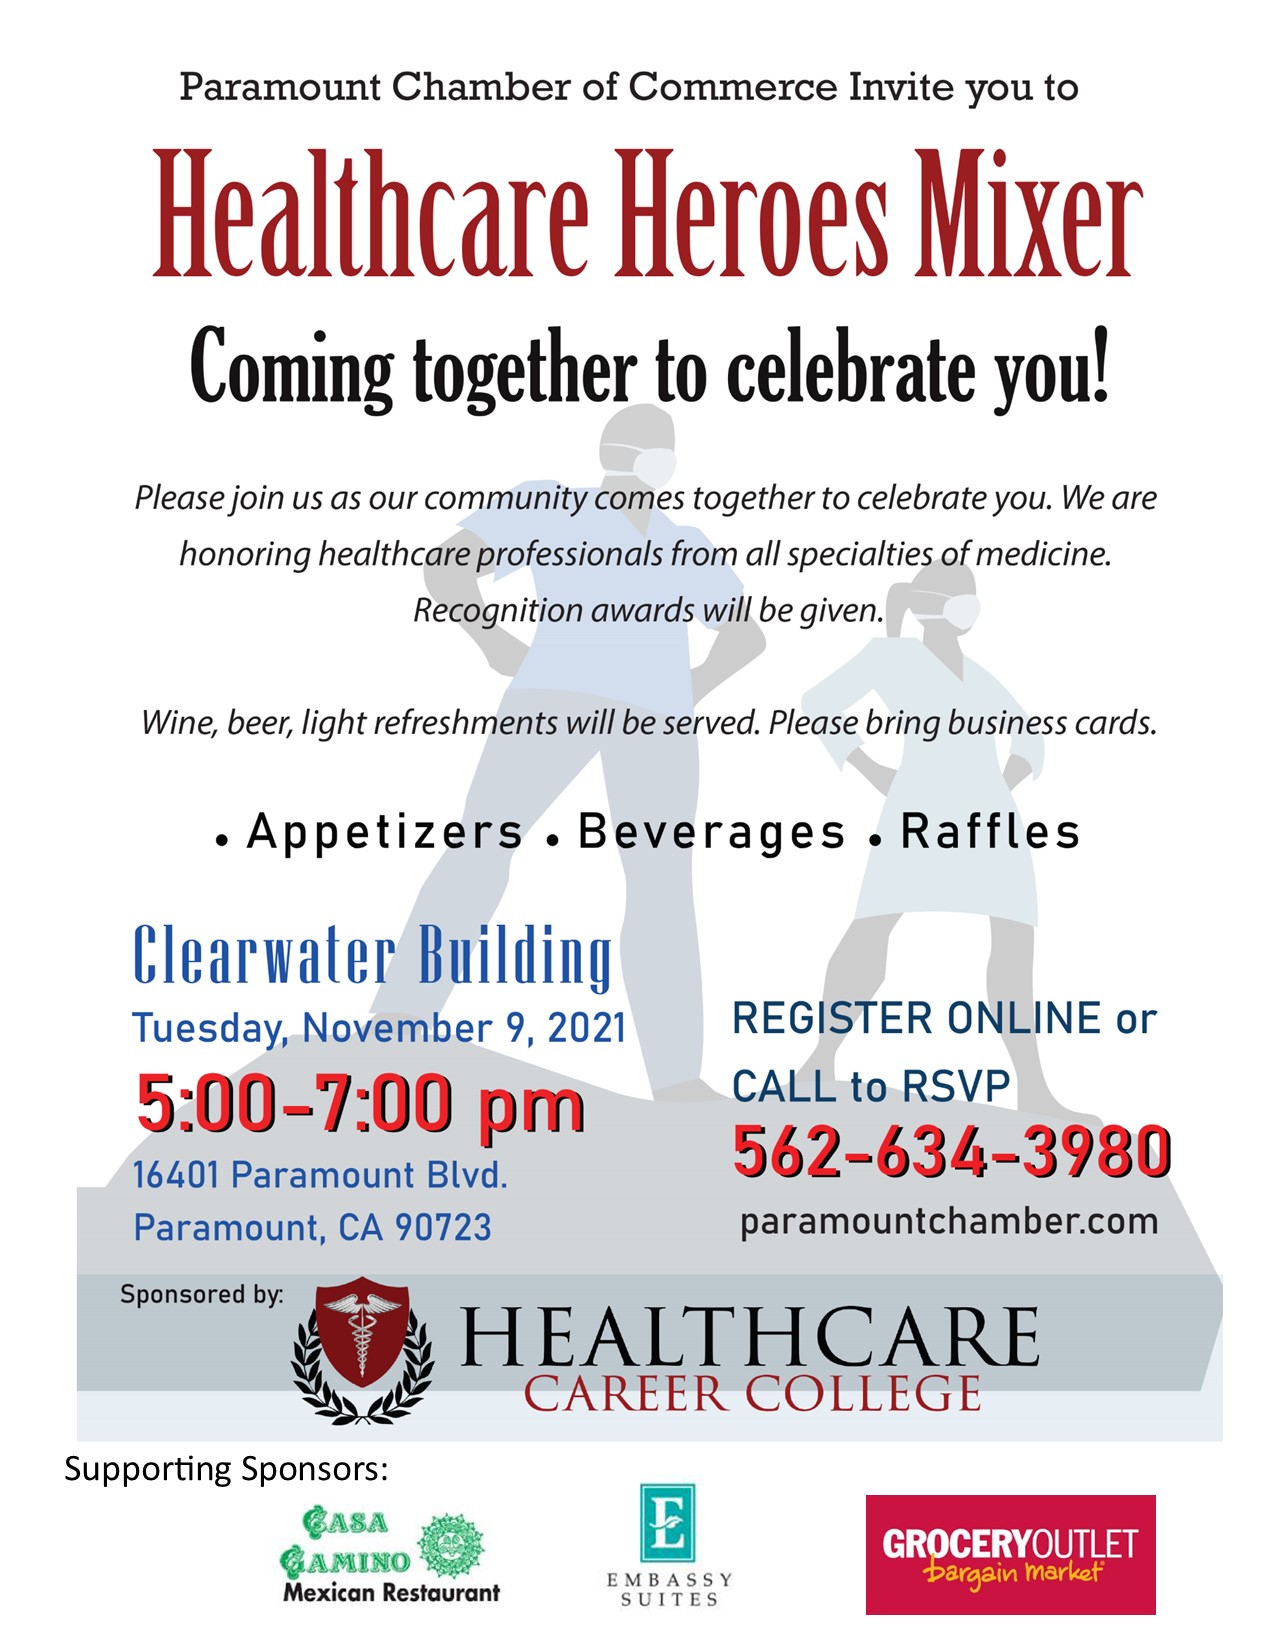 Healthcare Heroes Mixer_flyer with support